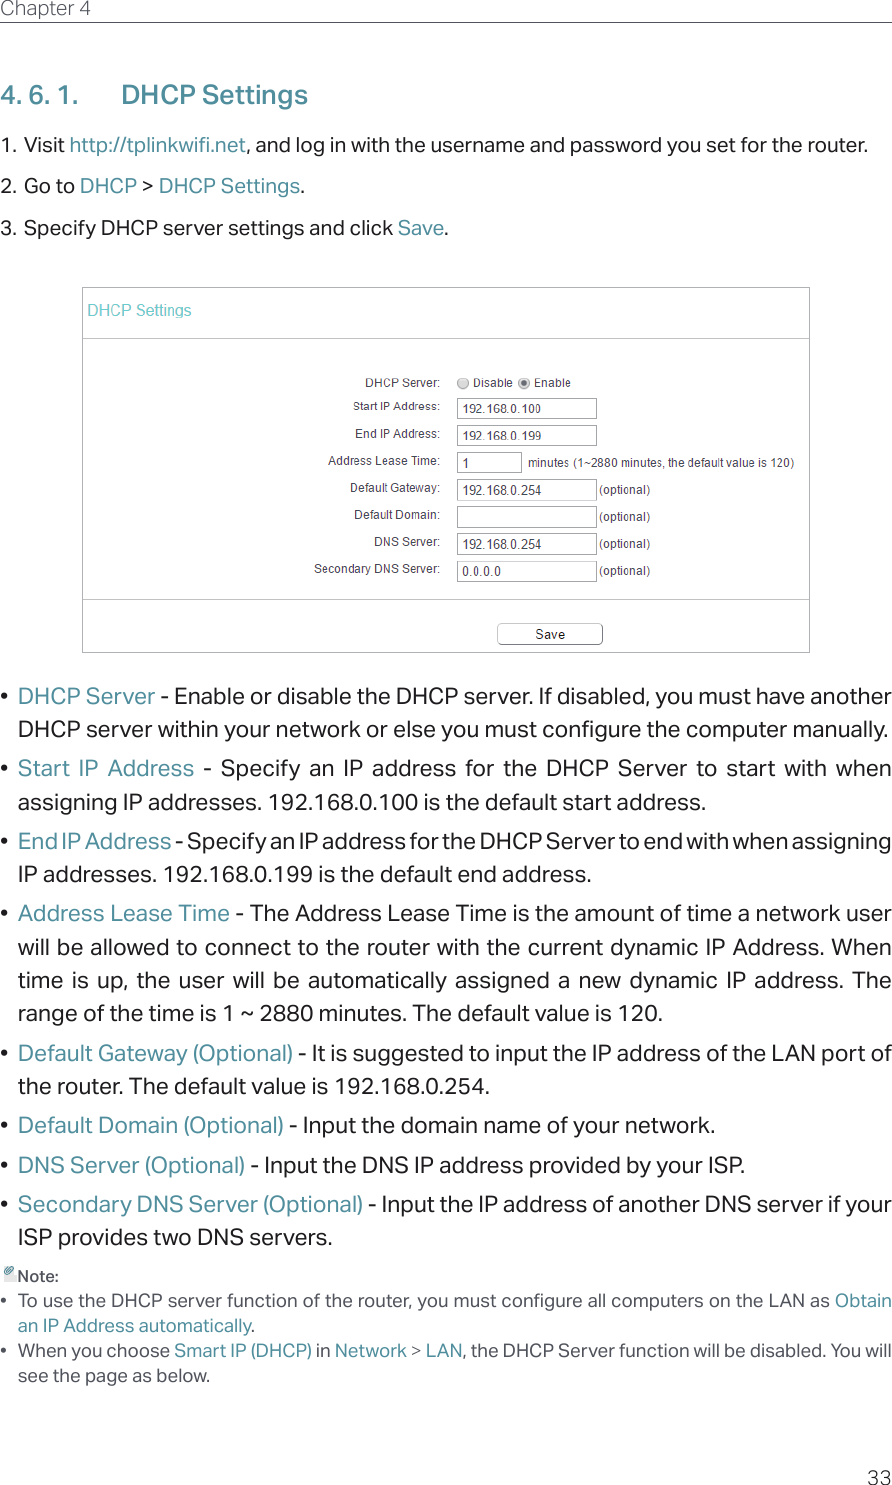 33Chapter 4  4. 6. 1.  DHCP Settings1. Visit http://tplinkwifi.net, and log in with the username and password you set for the router.2. Go to DHCP &gt; DHCP Settings. 3. Specify DHCP server settings and click Save.•  DHCP Server - Enable or disable the DHCP server. If disabled, you must have another DHCP server within your network or else you must configure the computer manually.•  Start IP Address - Specify an IP address for the DHCP Server to start with when assigning IP addresses. 192.168.0.100 is the default start address.•  End IP Address - Specify an IP address for the DHCP Server to end with when assigning IP addresses. 192.168.0.199 is the default end address.•  Address Lease Time - The Address Lease Time is the amount of time a network user will be allowed to connect to the router with the current dynamic IP Address. When time is up, the user will be automatically assigned a new dynamic IP address. The range of the time is 1 ~ 2880 minutes. The default value is 120.•  Default Gateway (Optional) - It is suggested to input the IP address of the LAN port of the router. The default value is 192.168.0.254.•  Default Domain (Optional) - Input the domain name of your network.•  DNS Server (Optional) - Input the DNS IP address provided by your ISP.•  Secondary DNS Server (Optional) - Input the IP address of another DNS server if your ISP provides two DNS servers. Note:•  To use the DHCP server function of the router, you must configure all computers on the LAN as Obtain an IP Address automatically.•  When you choose Smart IP (DHCP) in Network &gt; LAN, the DHCP Server function will be disabled. You will see the page as below.